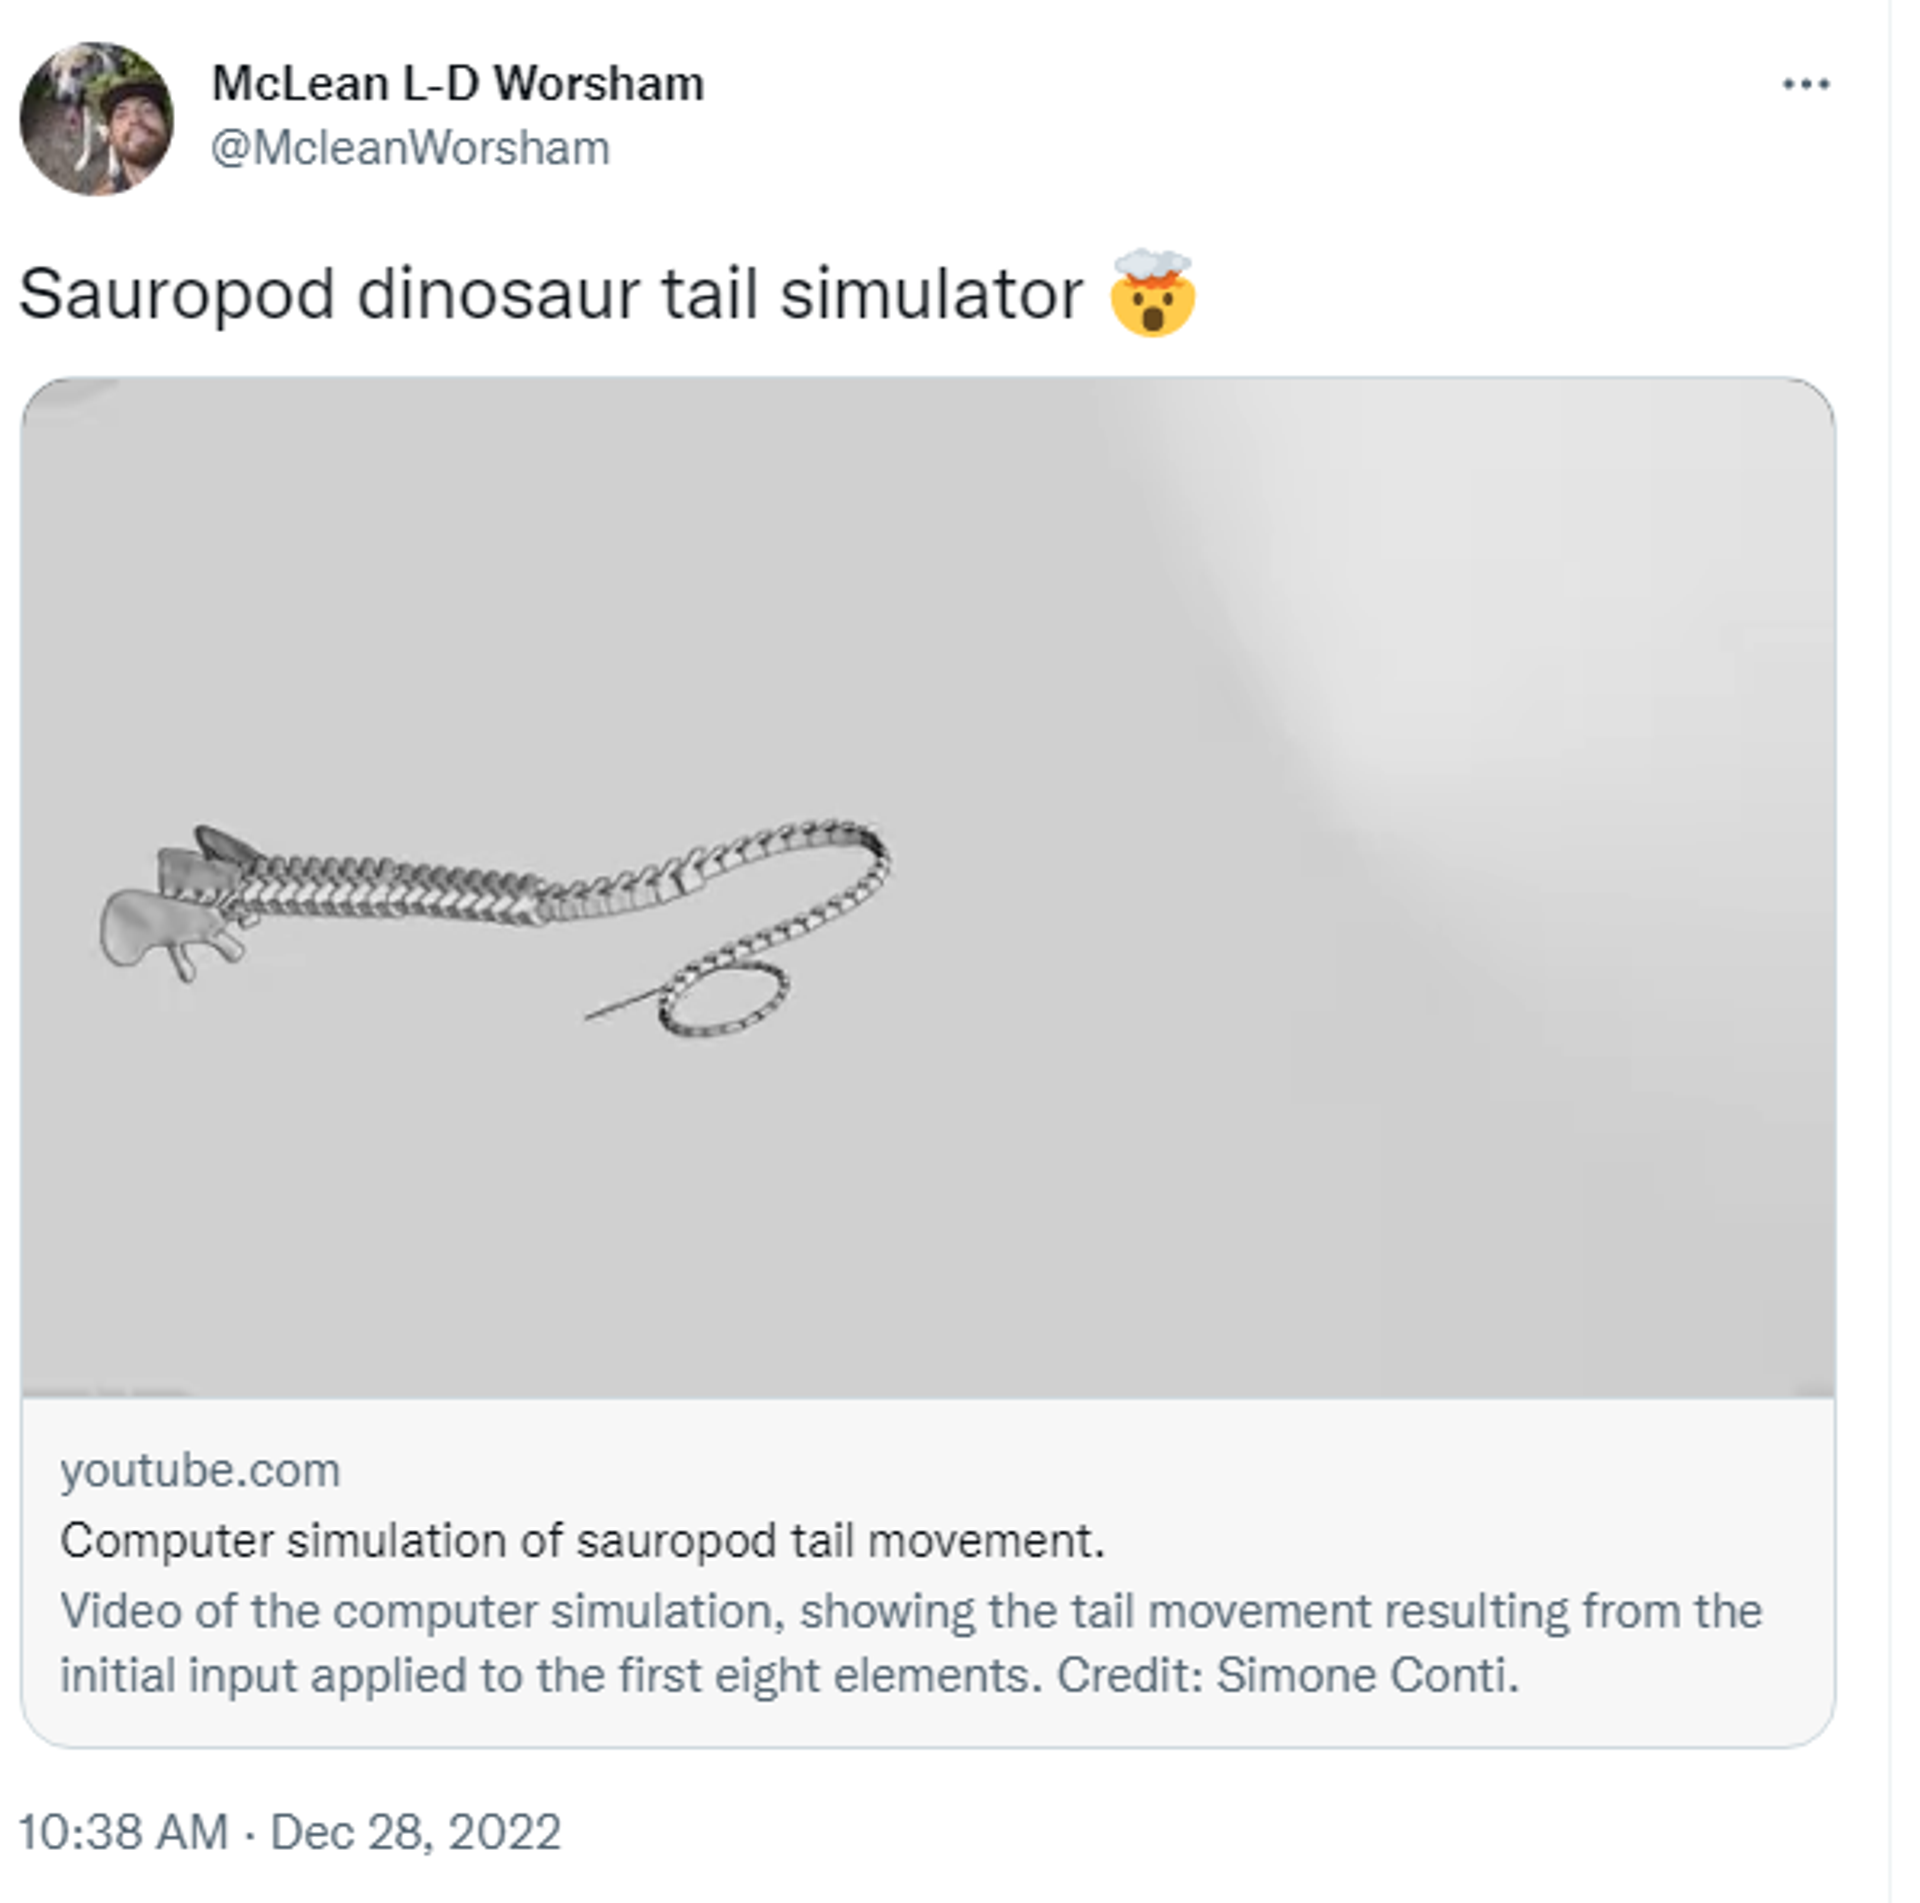 Twitter screenshot referencing video of the computer simulation showing the tail movement of a saurpod dinosaur. Credit: Simone Conti. - Sputnik International, 1920, 28.12.2022